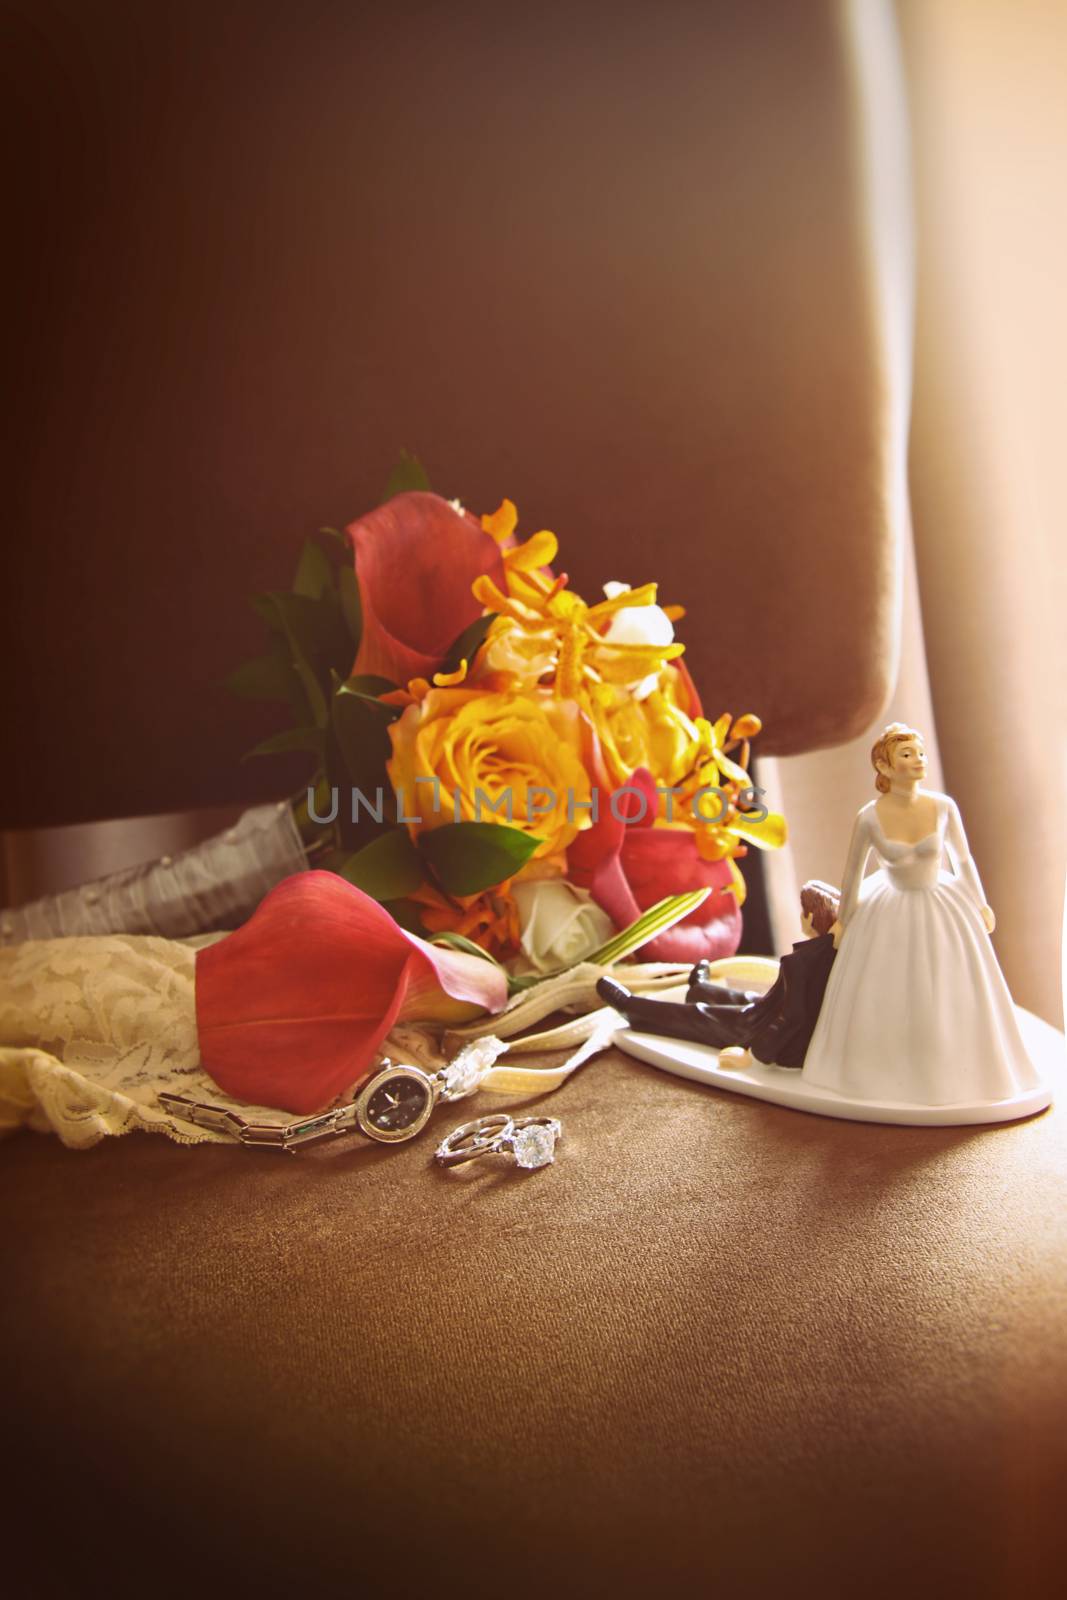 Cake figurines with bouquet on velvet chair